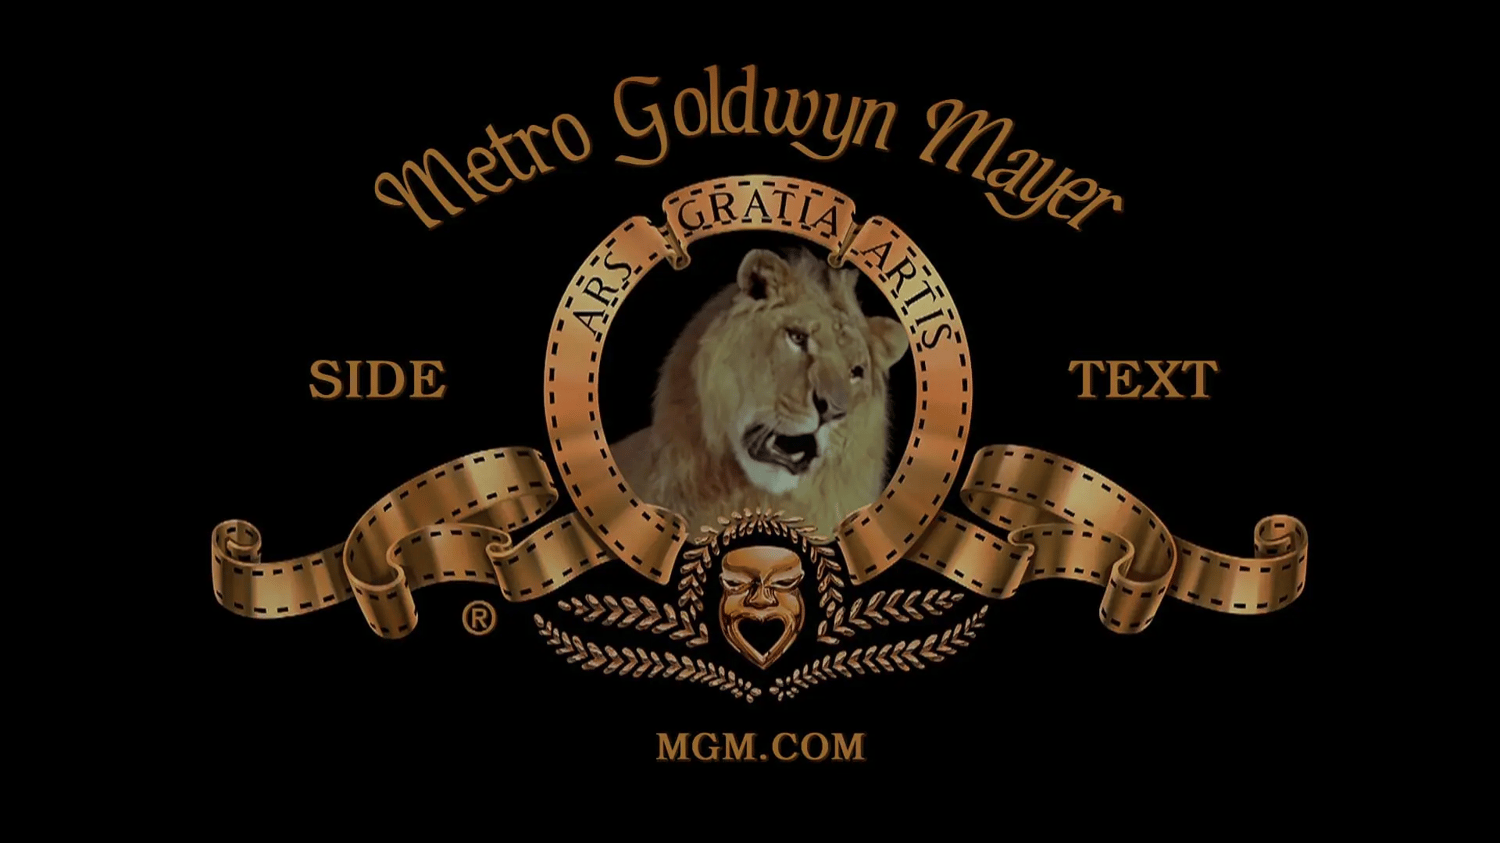 mgm after effects template